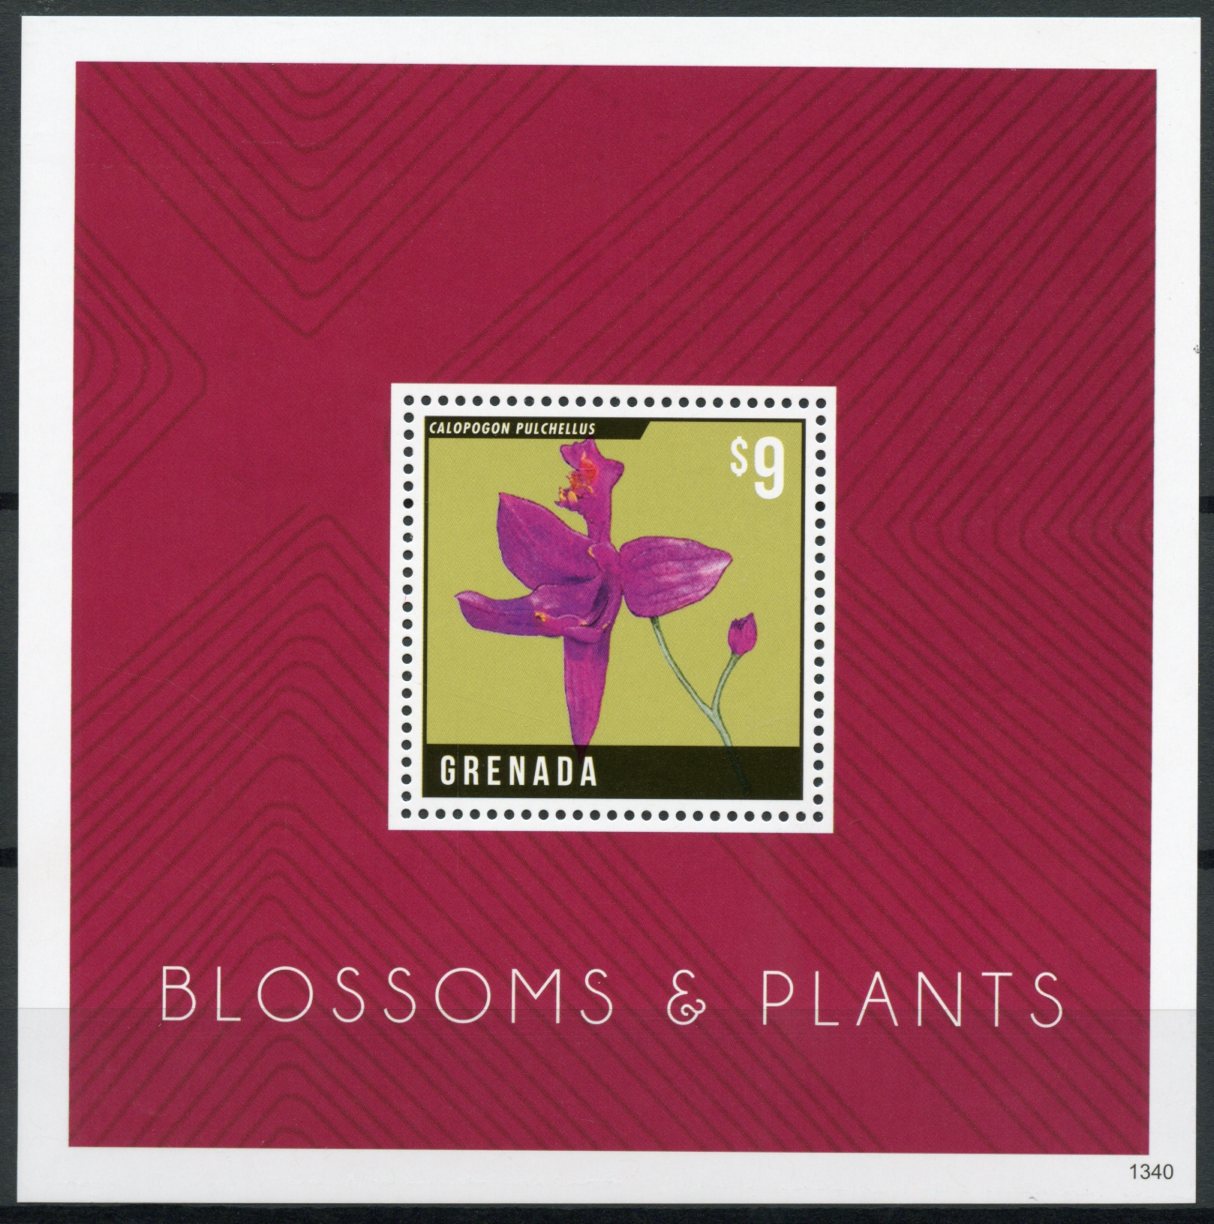 Grenada 2013 MNH Blossoms & Plants 1v S/S Flowers Calopogon Orchids Grass Pink